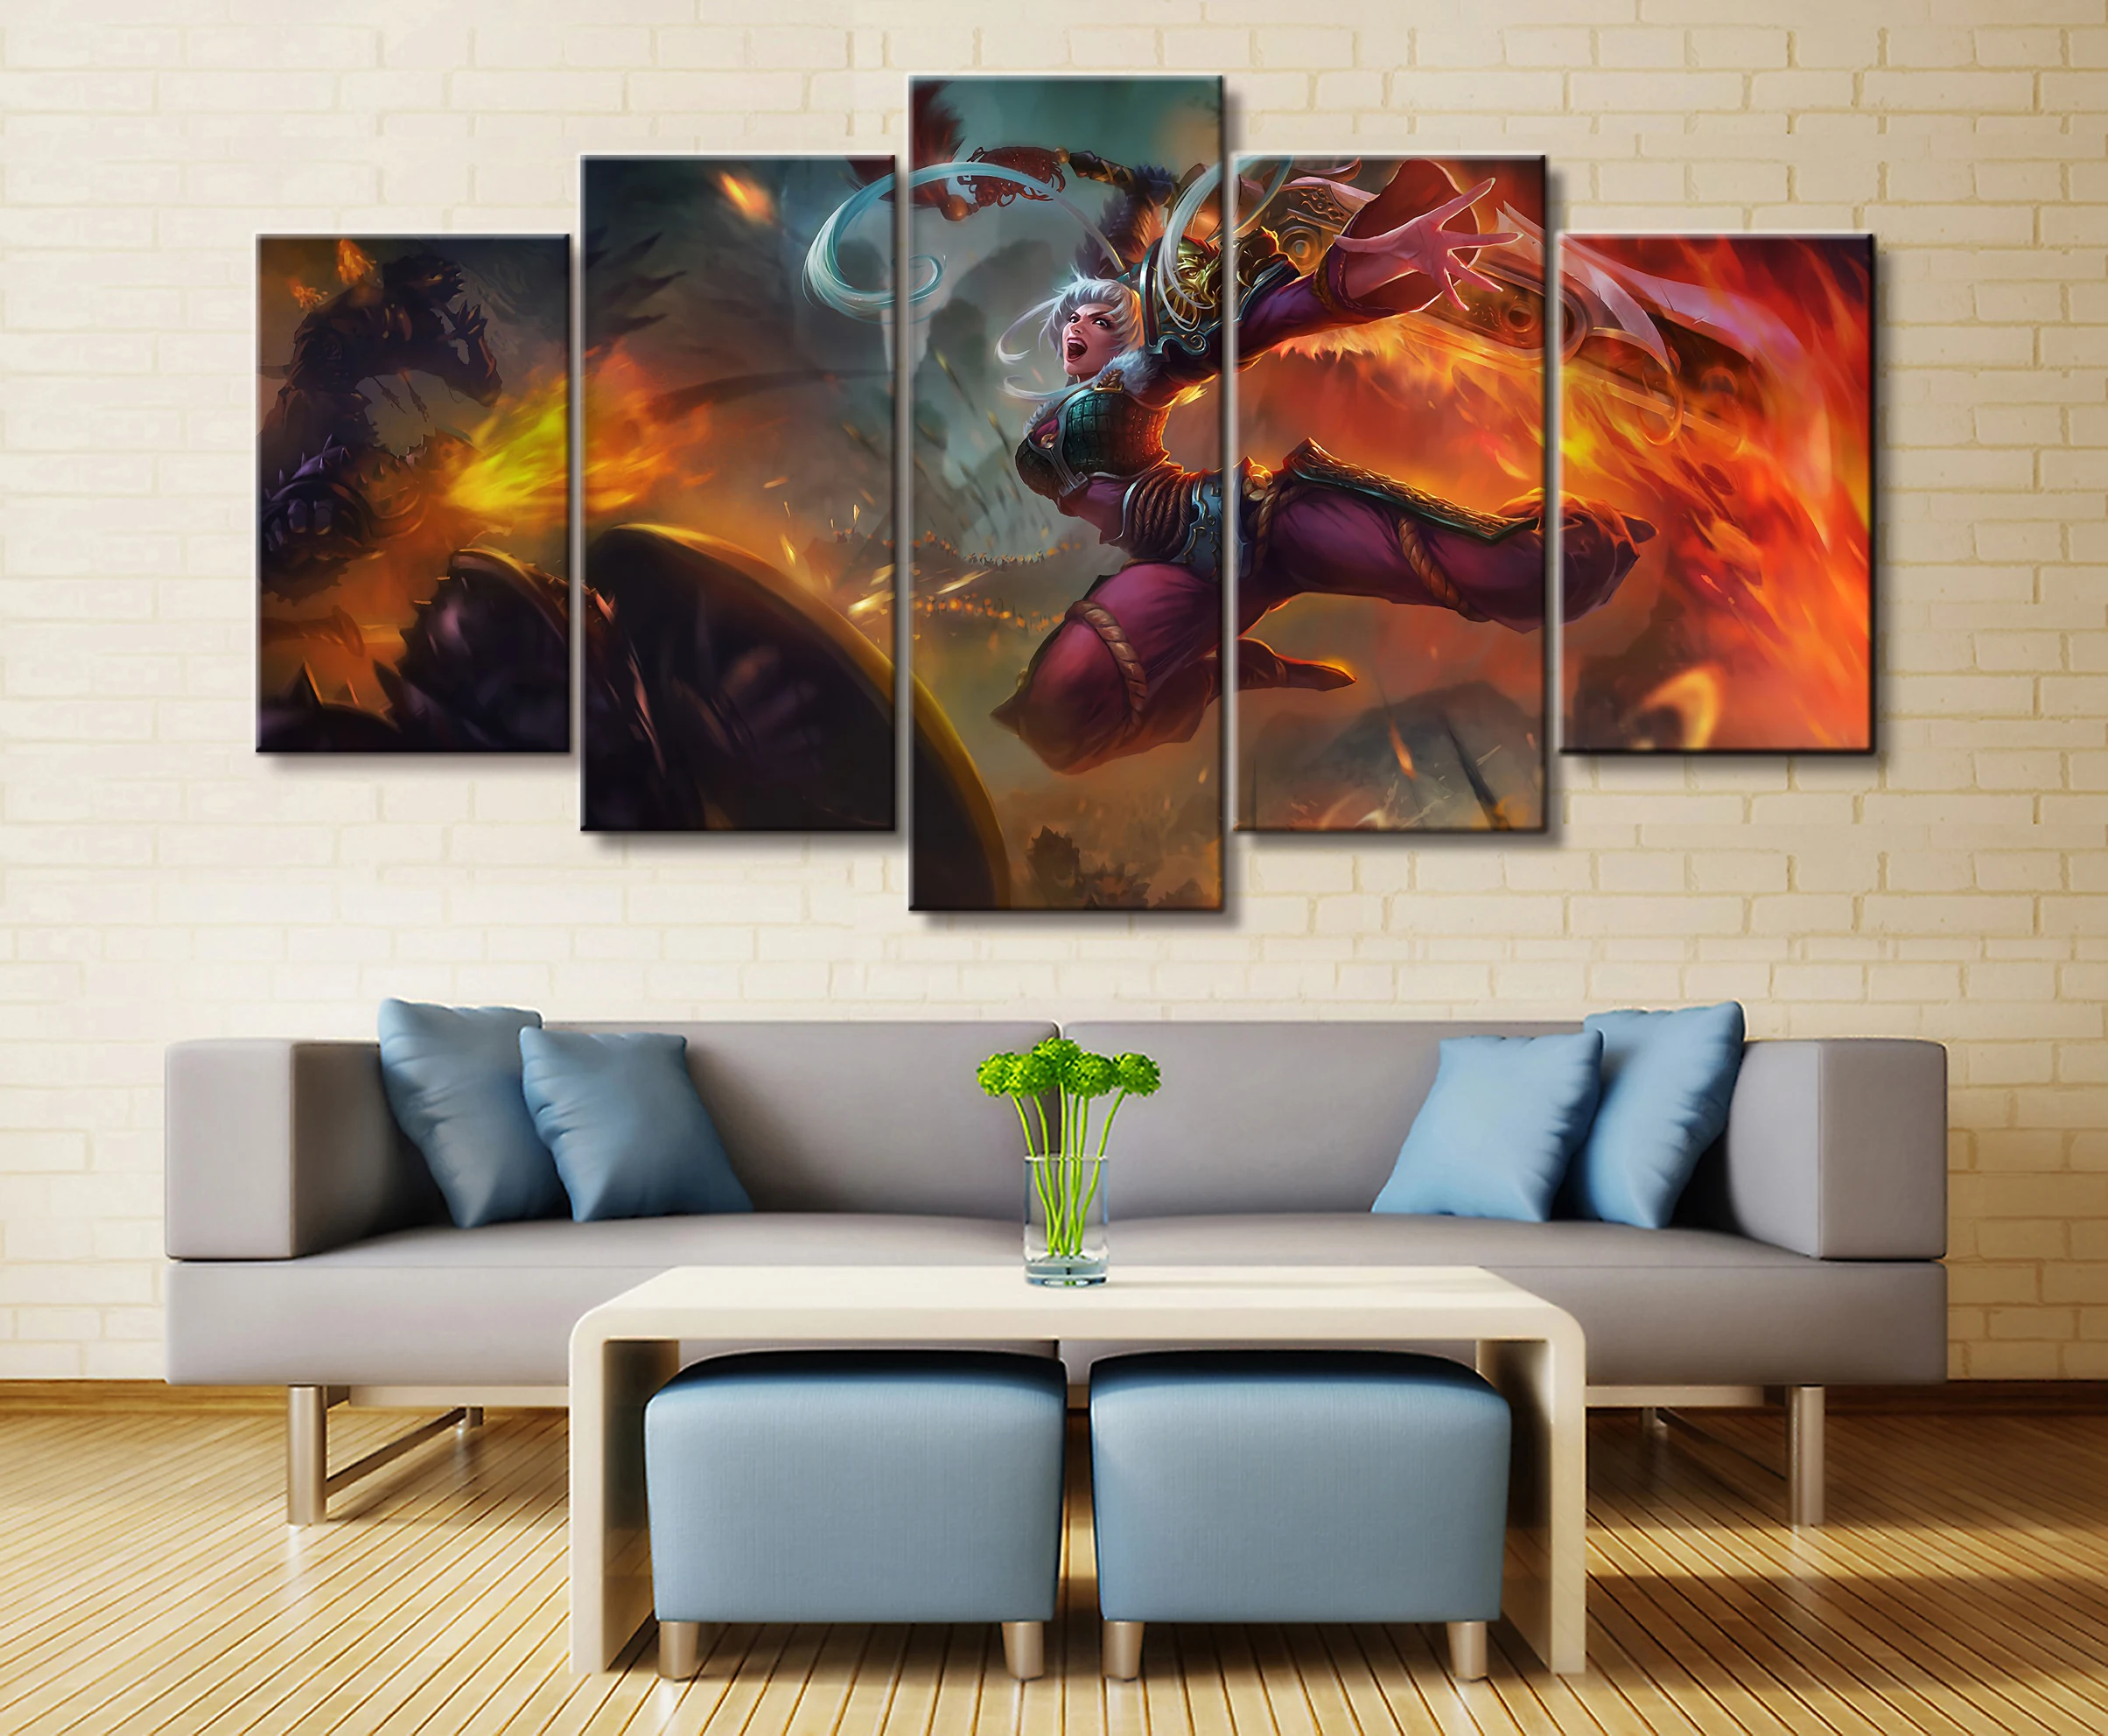 Home Decor Modular Picture Canvas Painting 3 Piece My Hero Academia Animation Poster Wall For Living Room Modern